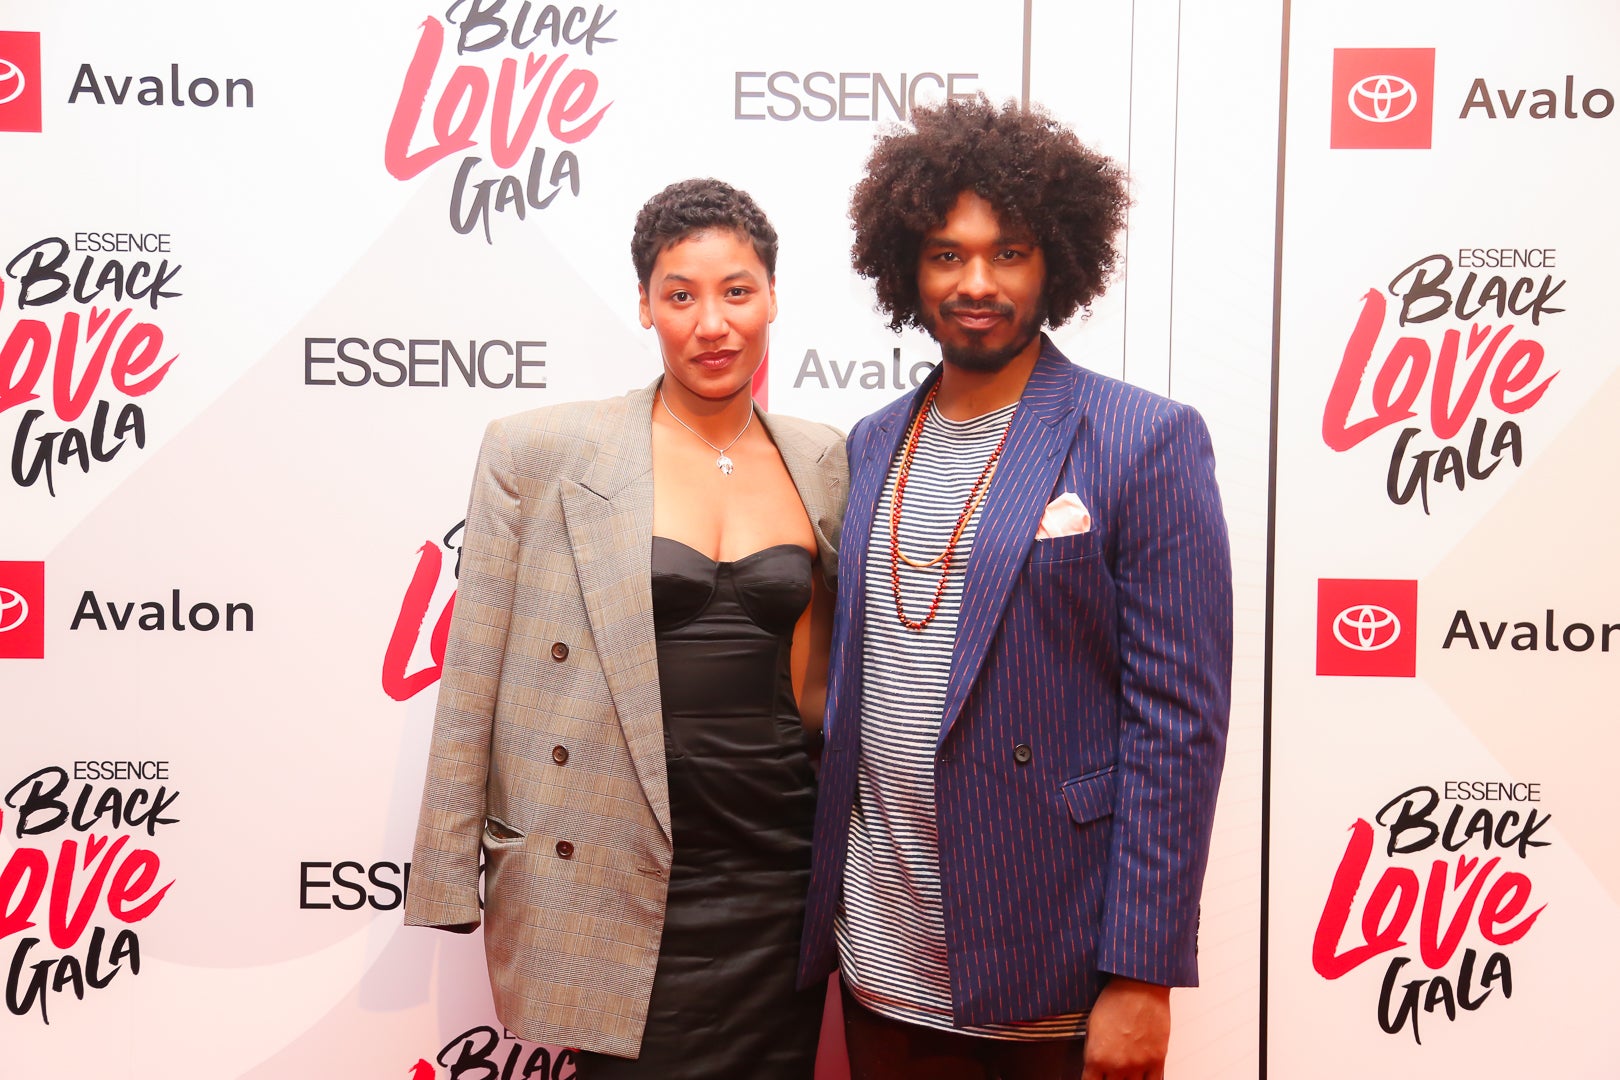 These Couples Came Out To Celebrate and Spread Love at ESSENCE's Black Love Gala In NYC